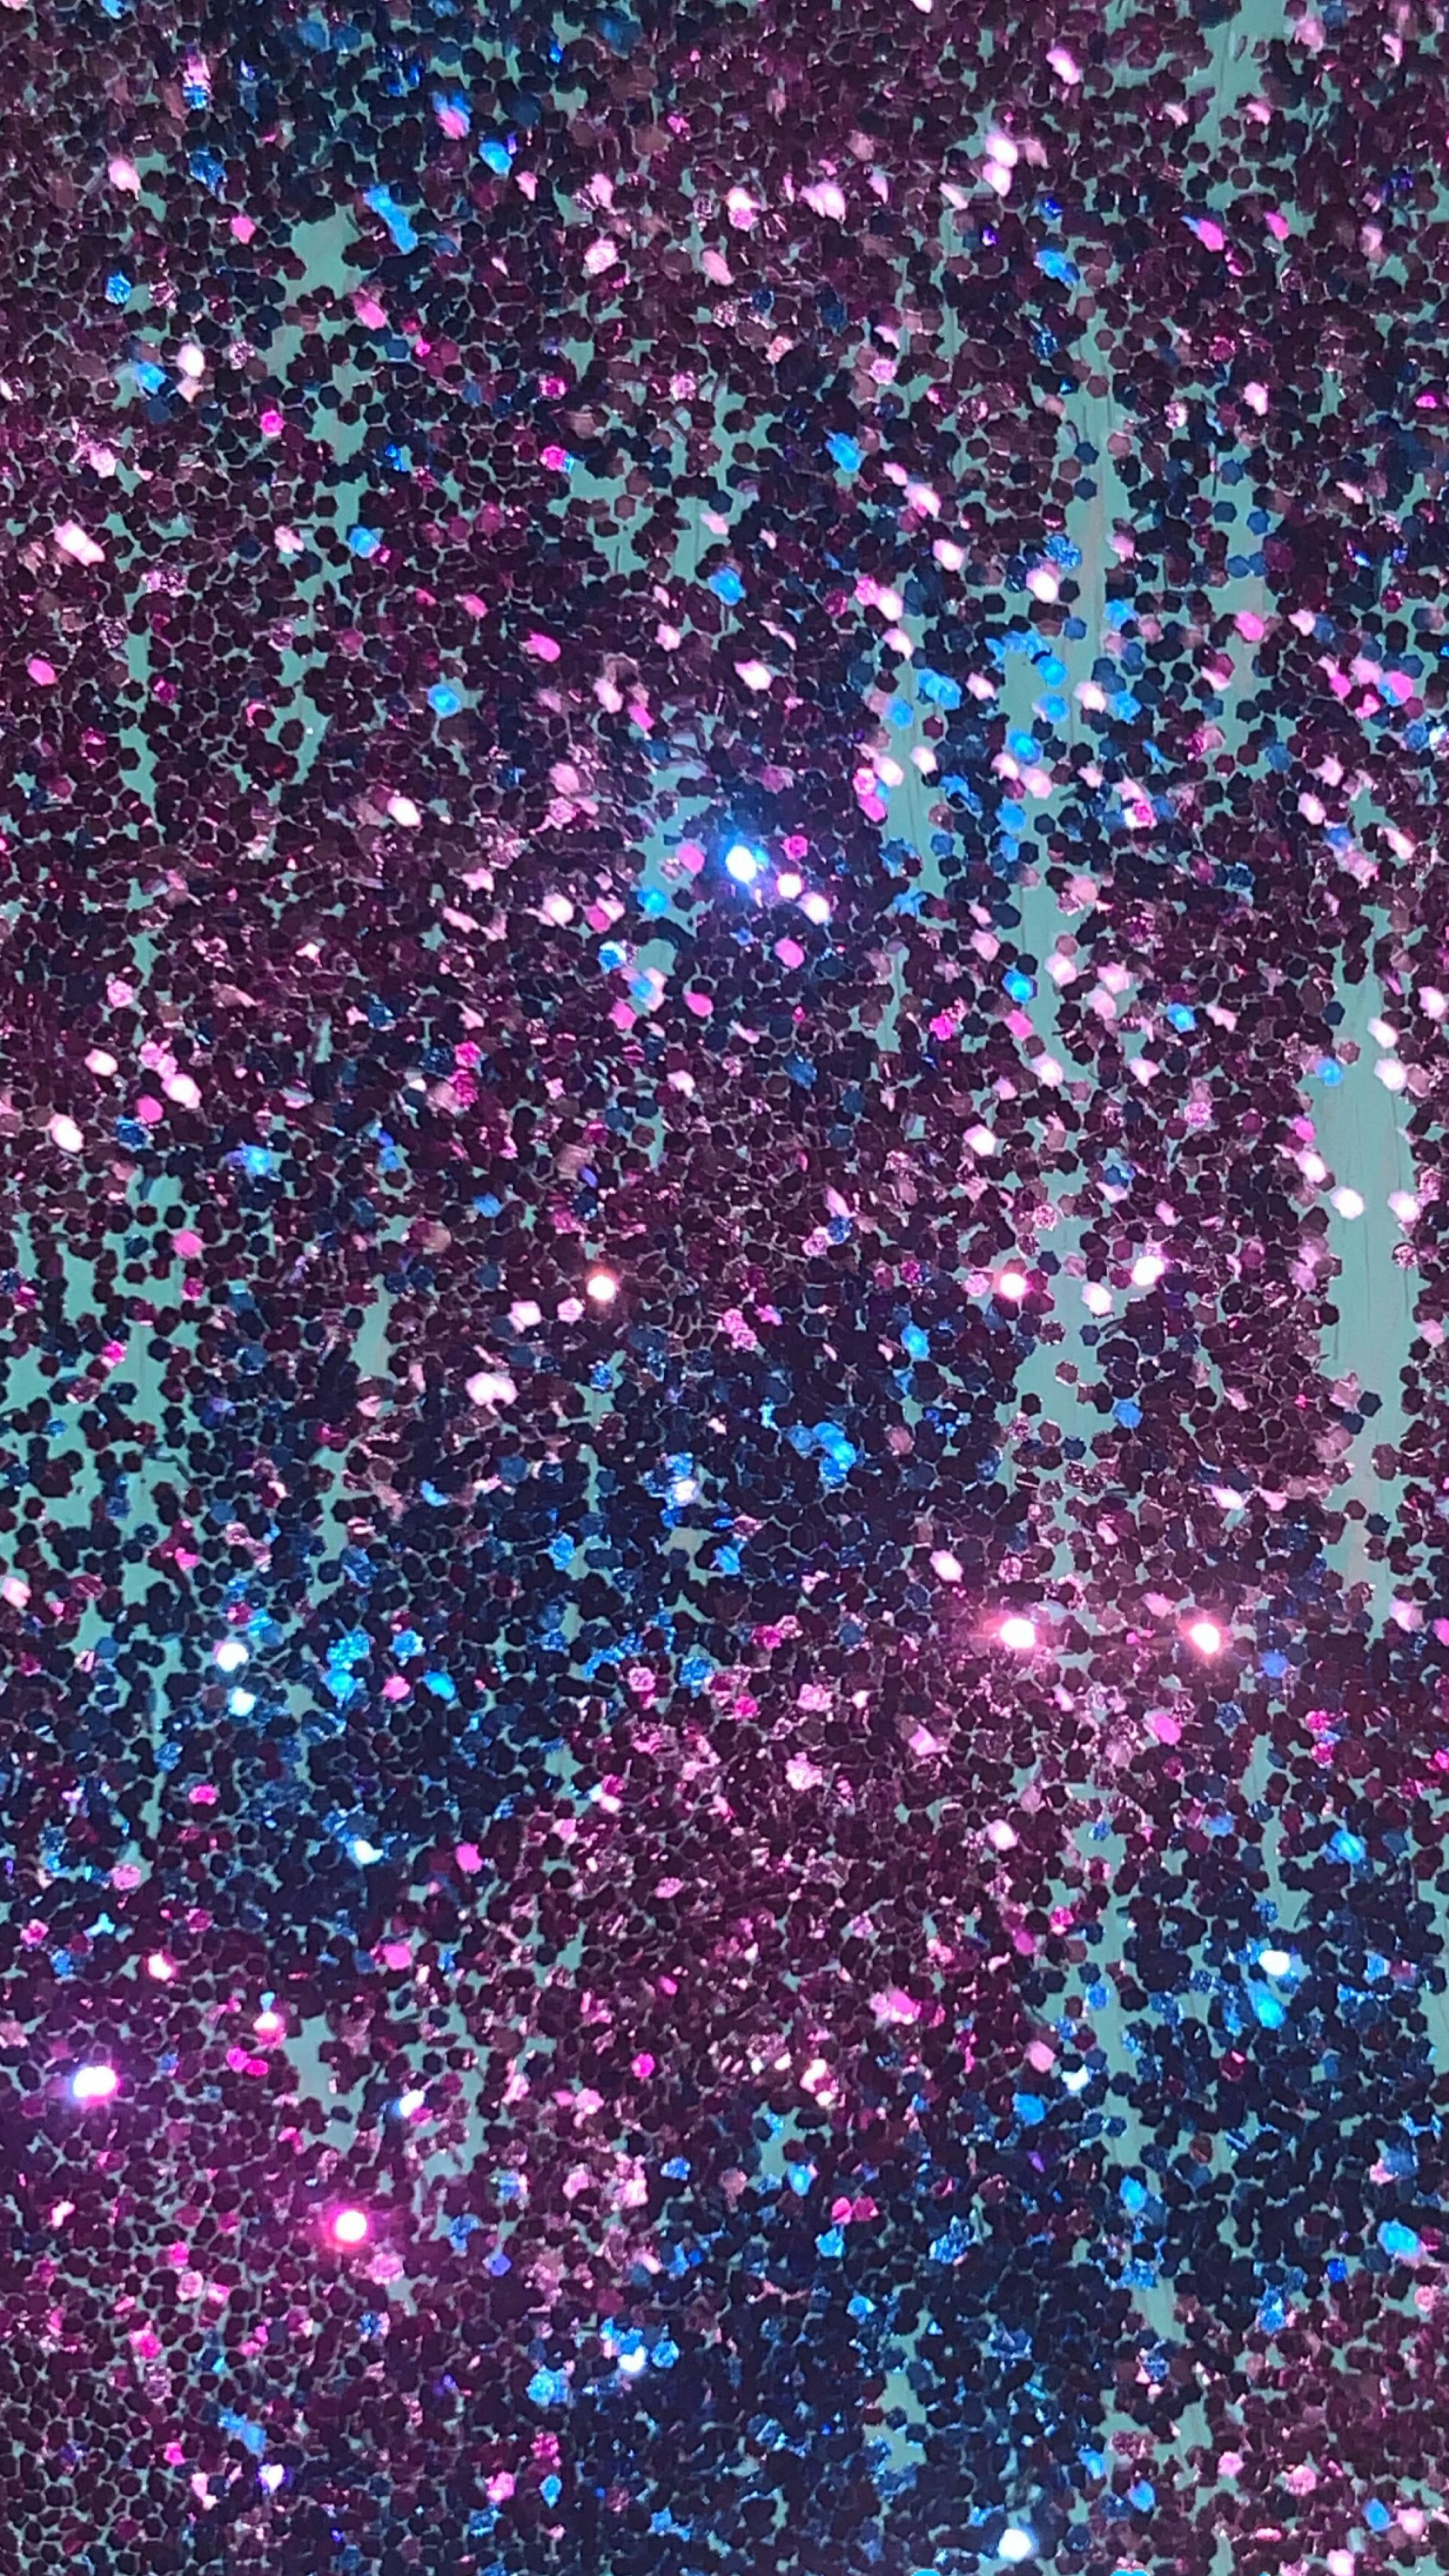 Sparkle: Glitter, Used in crafts and decorations. 2160x3840 4K Wallpaper.